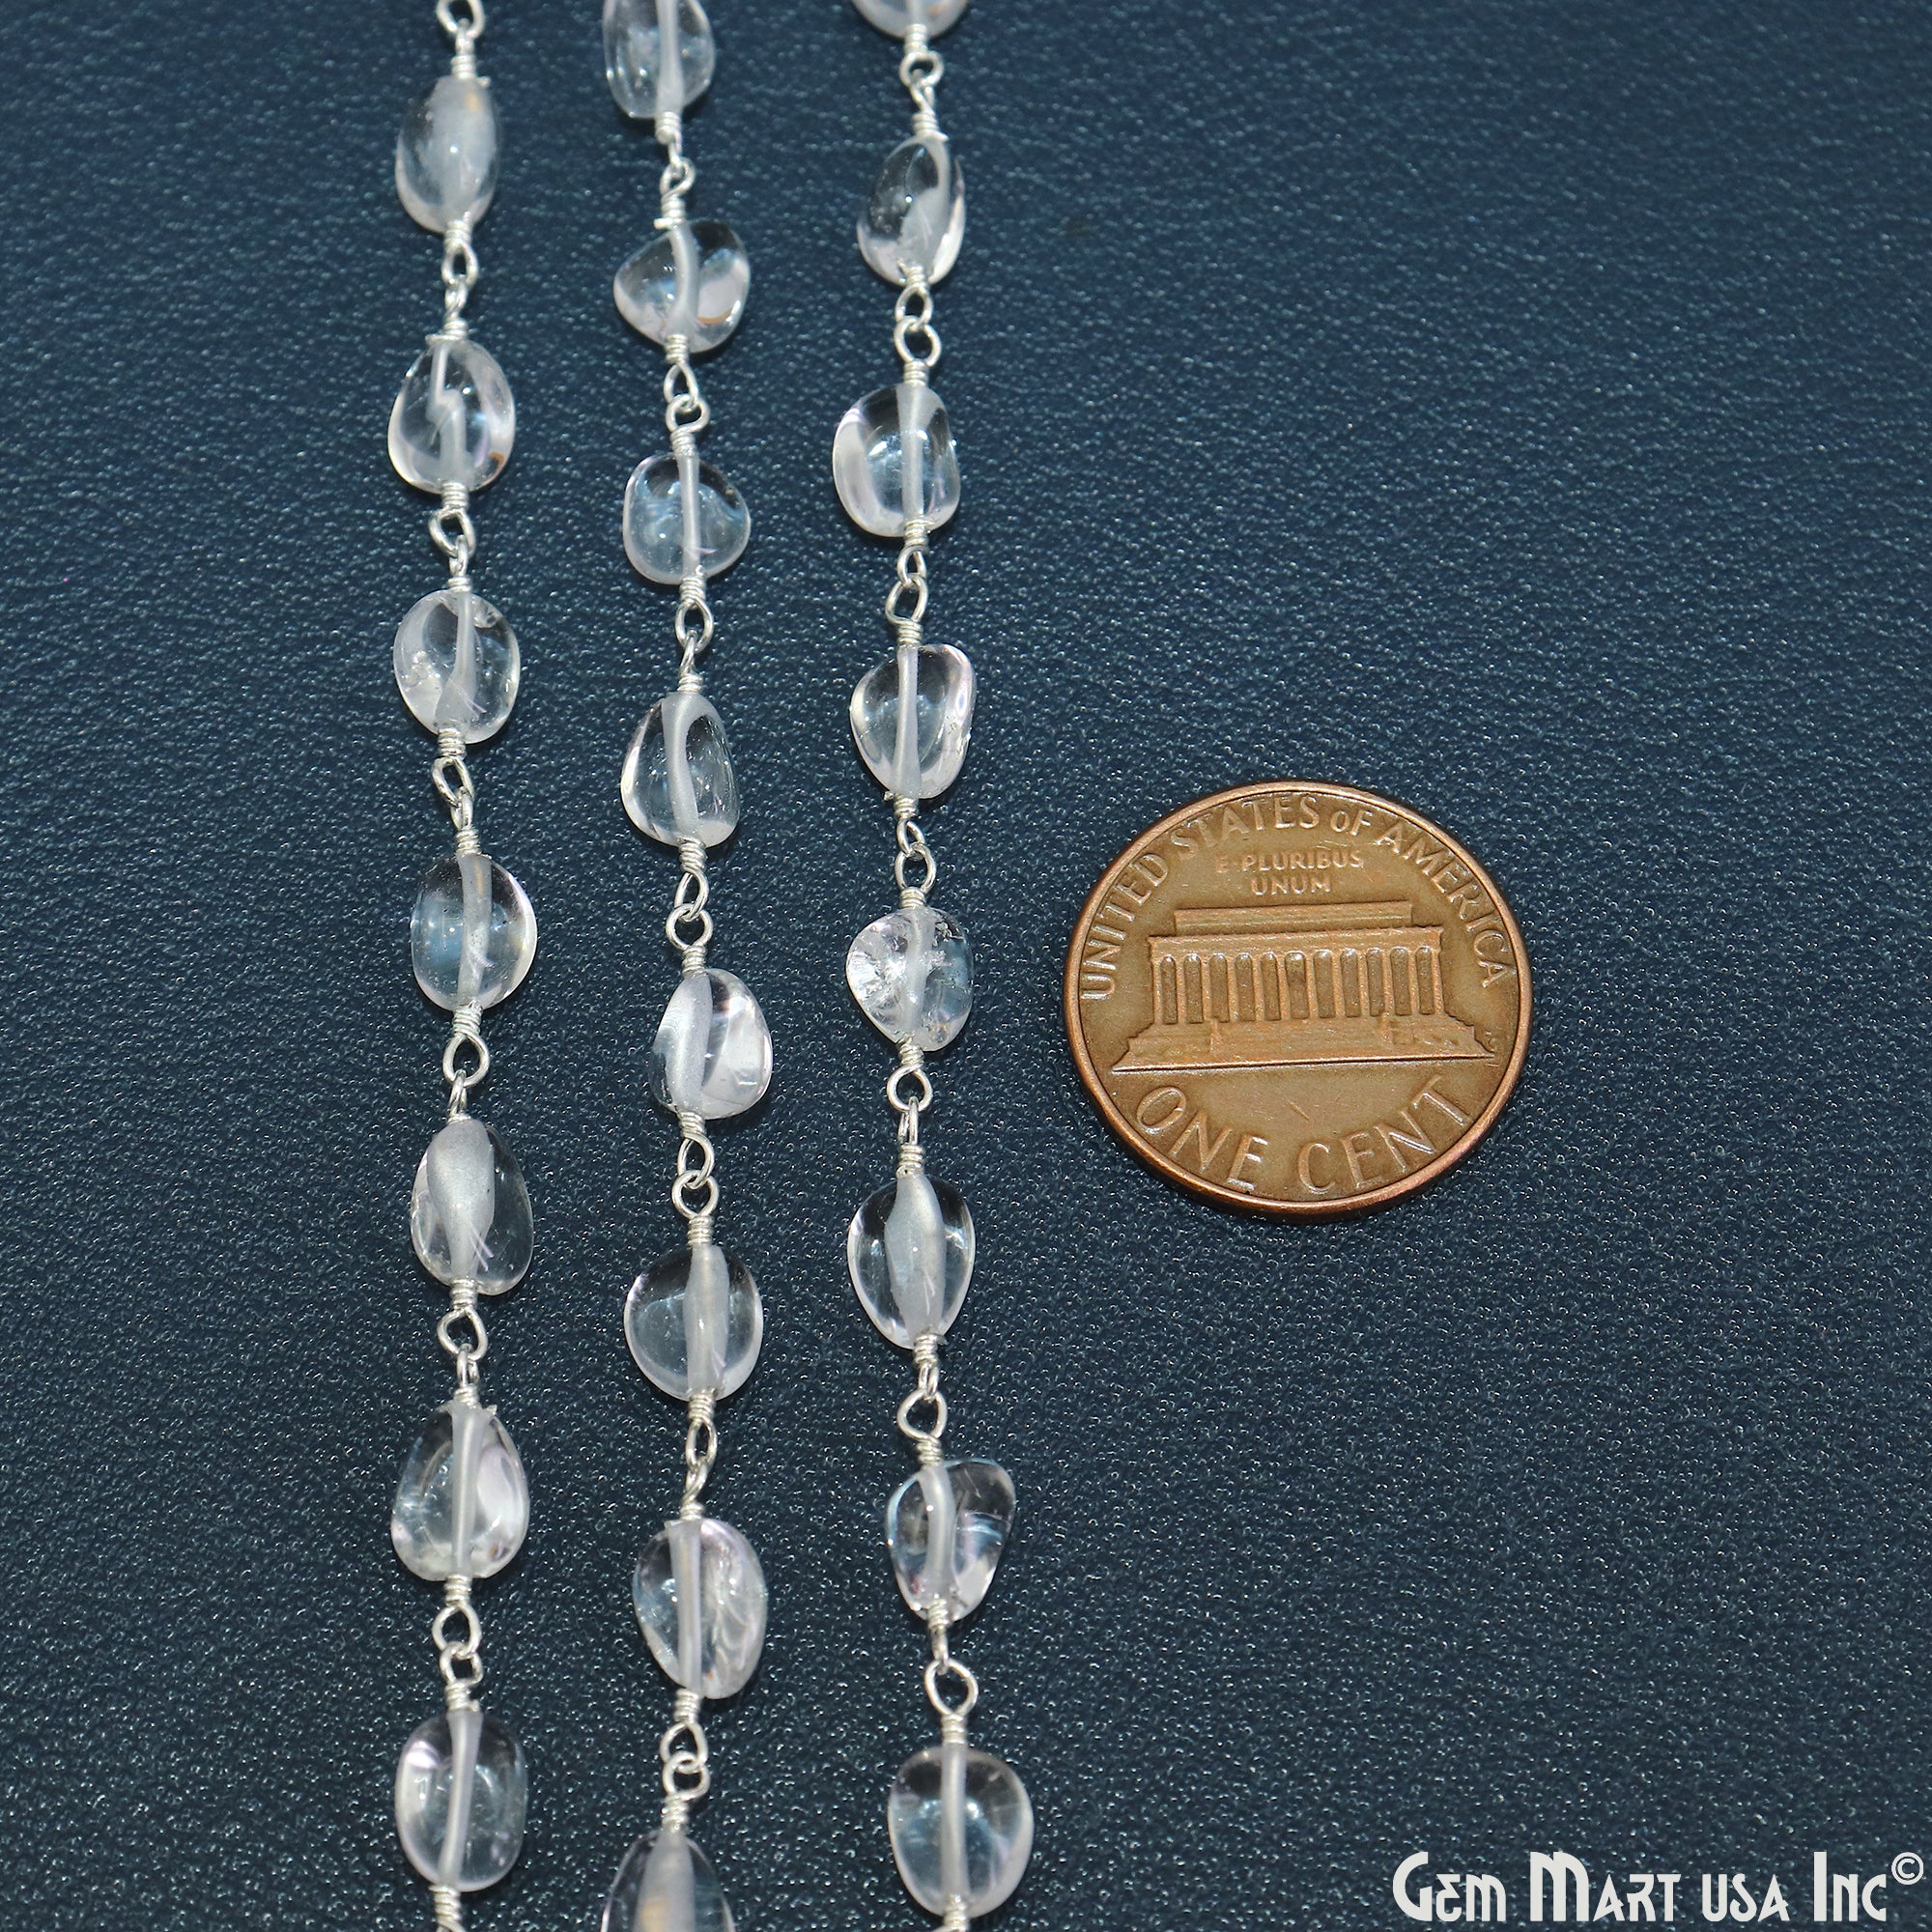 Crystal Tumble Beads 8x5mm Silver Wire Wrapped Rosary Chain